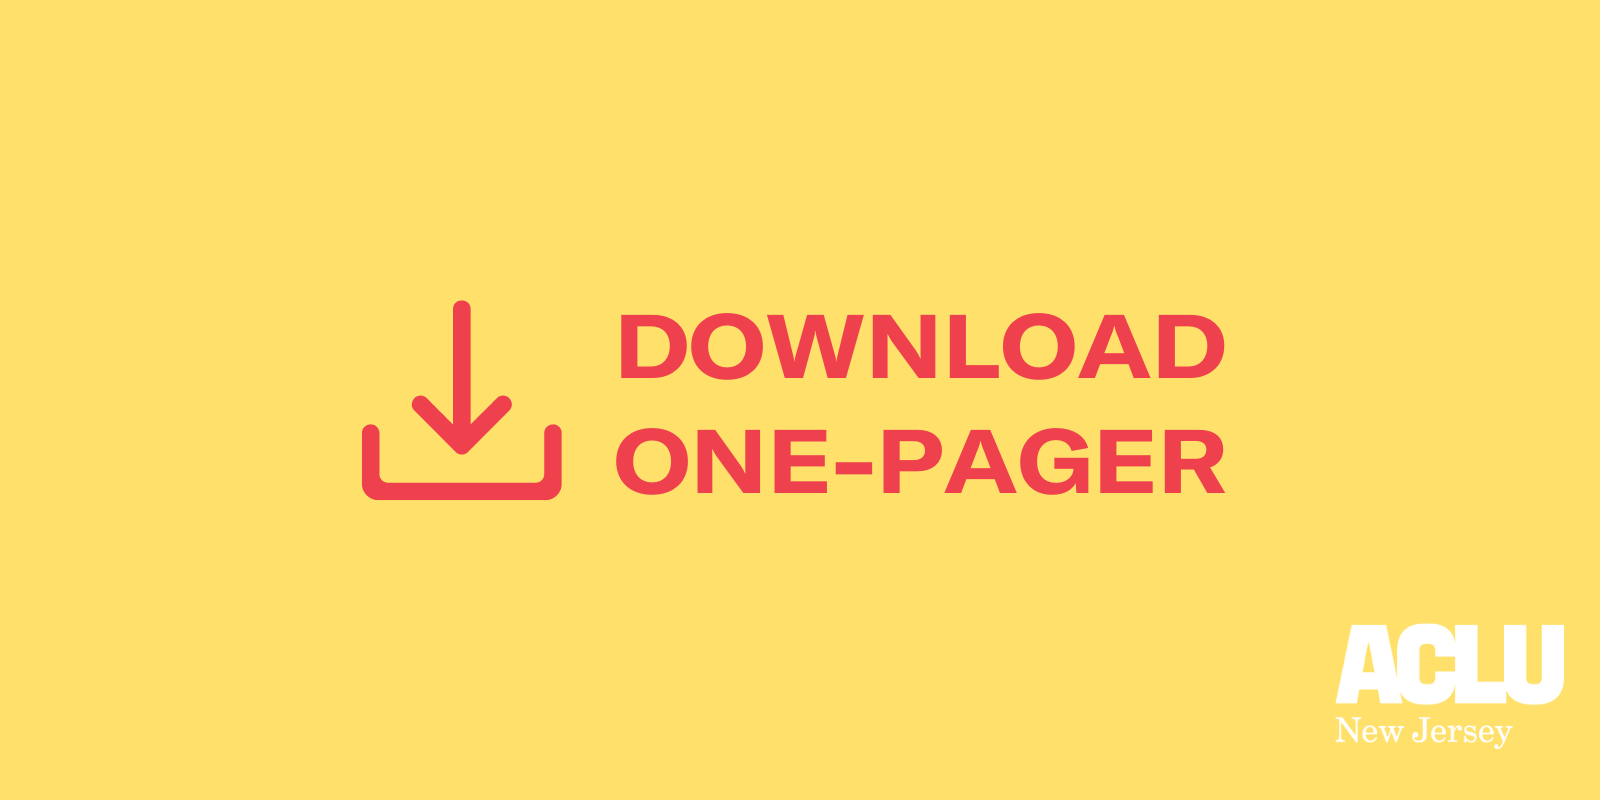 A bright red background contains an illustration of an arrow pointing downward in a box on the left with copy that reads "download one-pager"